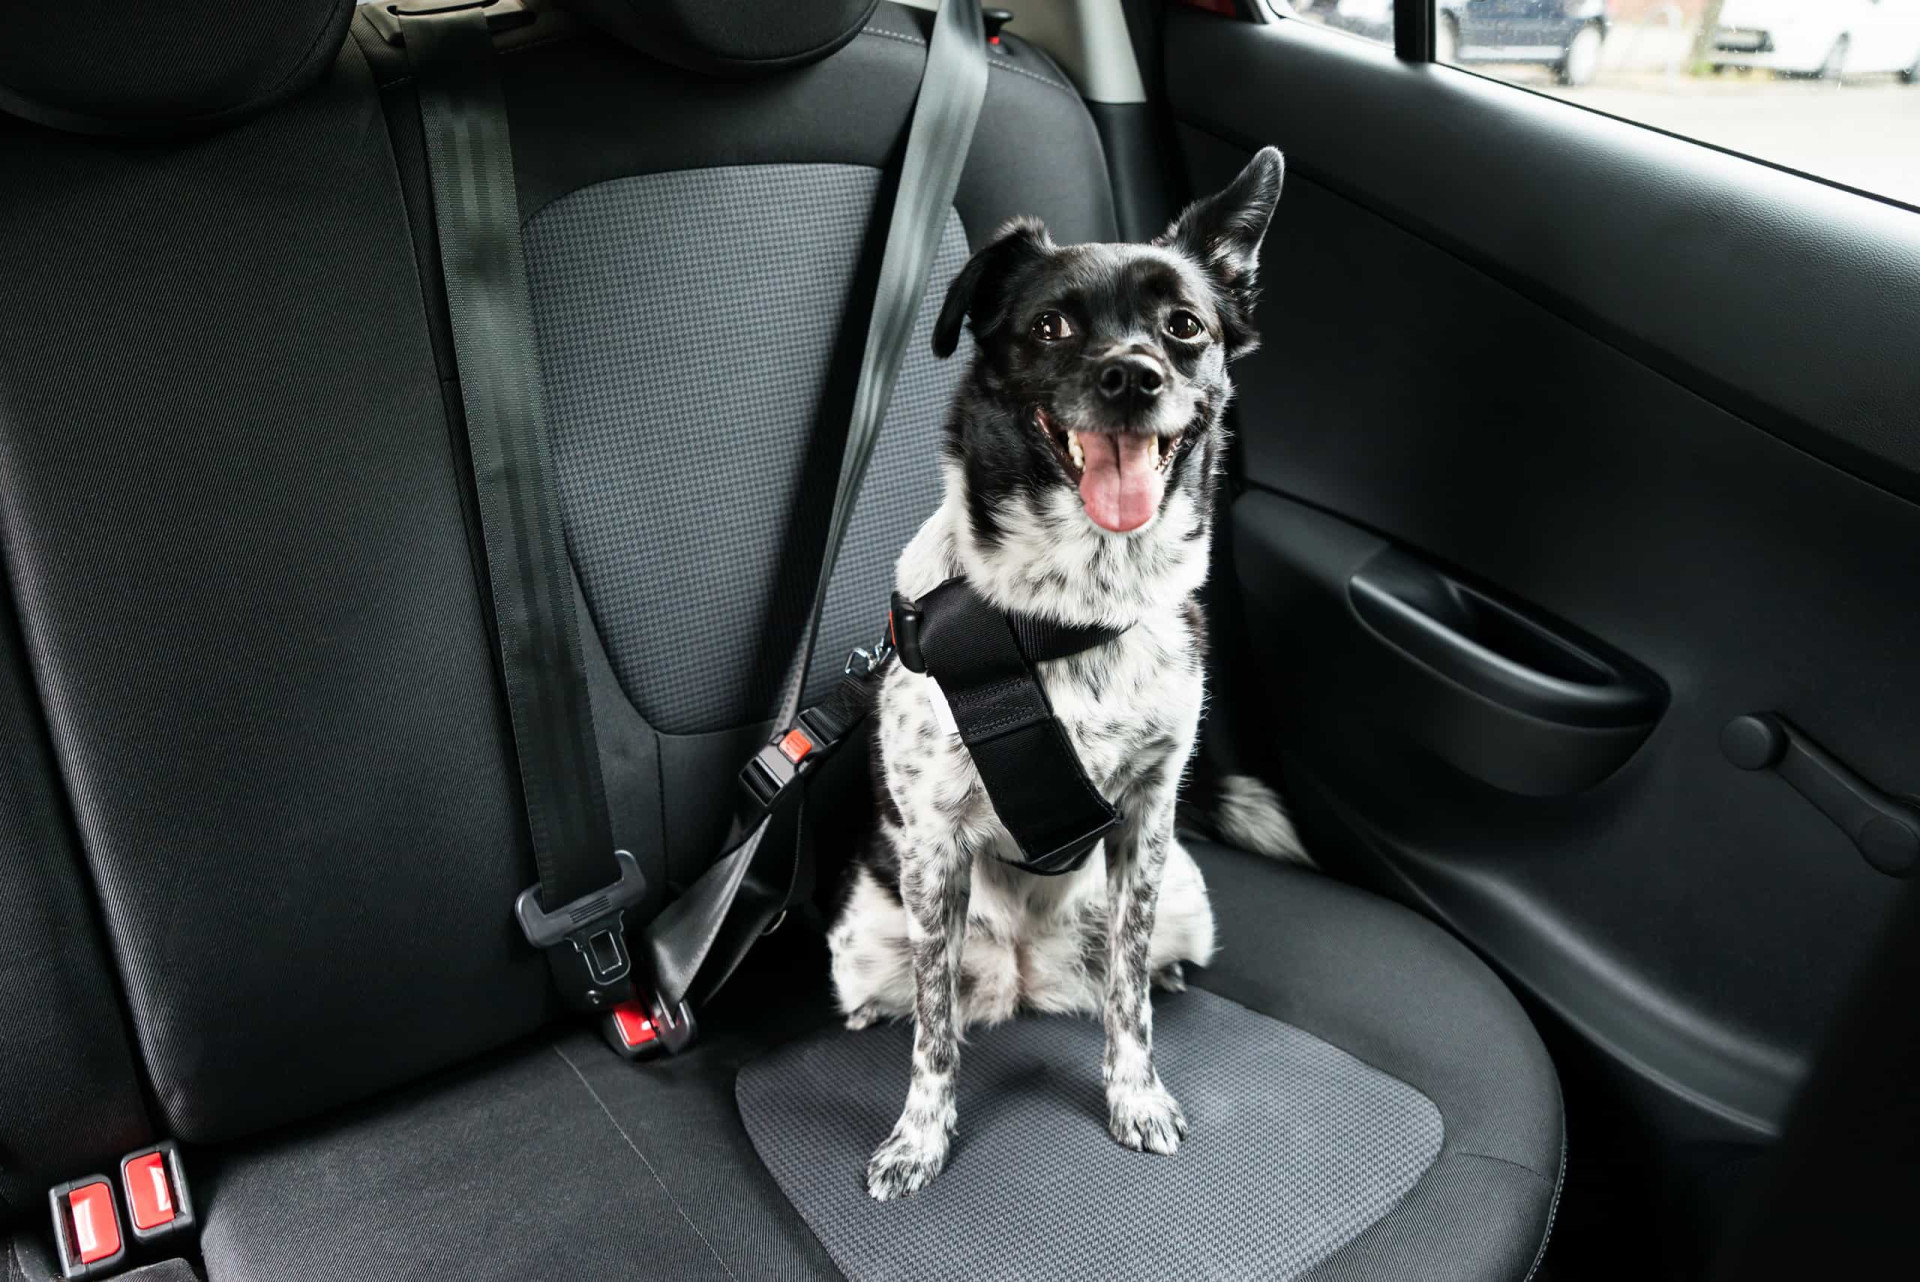 <p>A harness is a great option to use with the seatbelt. A good one should be comfy and keep your dog safe.</p><p>You may also like:<a href="https://www.starsinsider.com/n/458733?utm_source=msn.com&utm_medium=display&utm_campaign=referral_description&utm_content=719768en-us"> The terror that was the Russian Gulag</a></p>